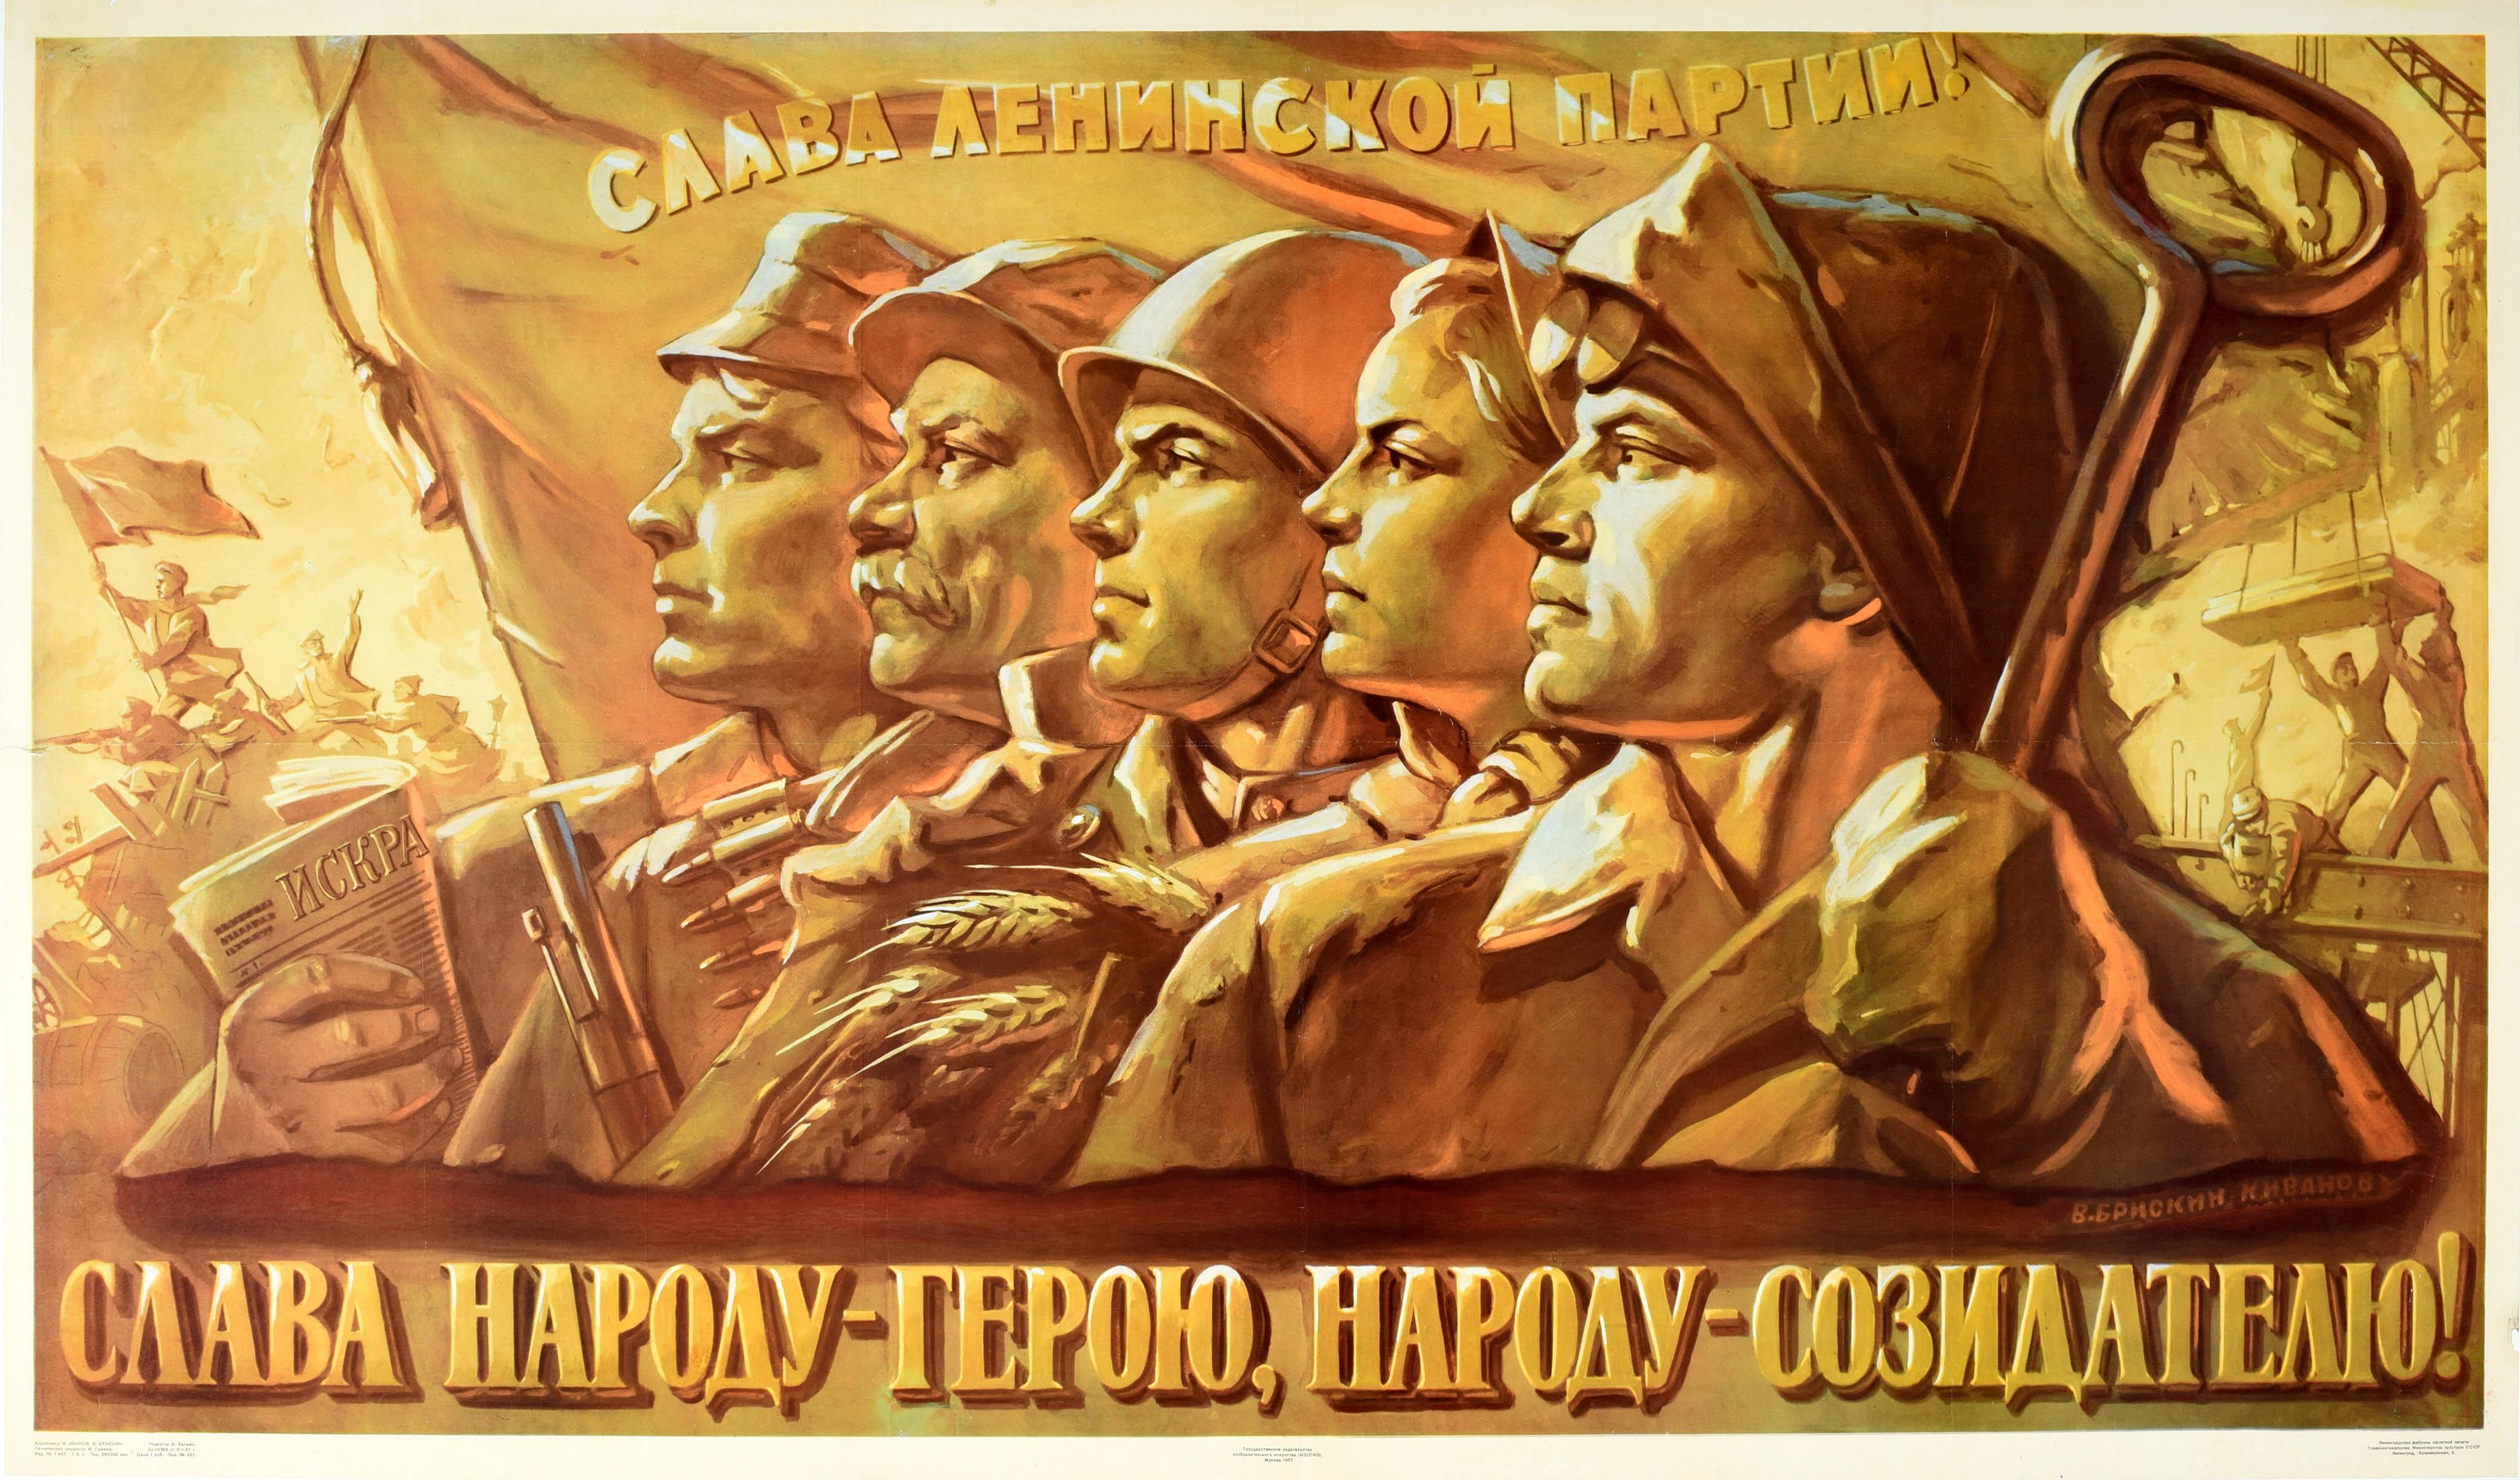 Original vintage Soviet propaganda poster - Glory to the heroes, the creator people! / ????? ??????-?????, ??????-??????????! - featuring a row of people in military uniform and workers including a miner, farmer and soldier holding tools, wheat, a